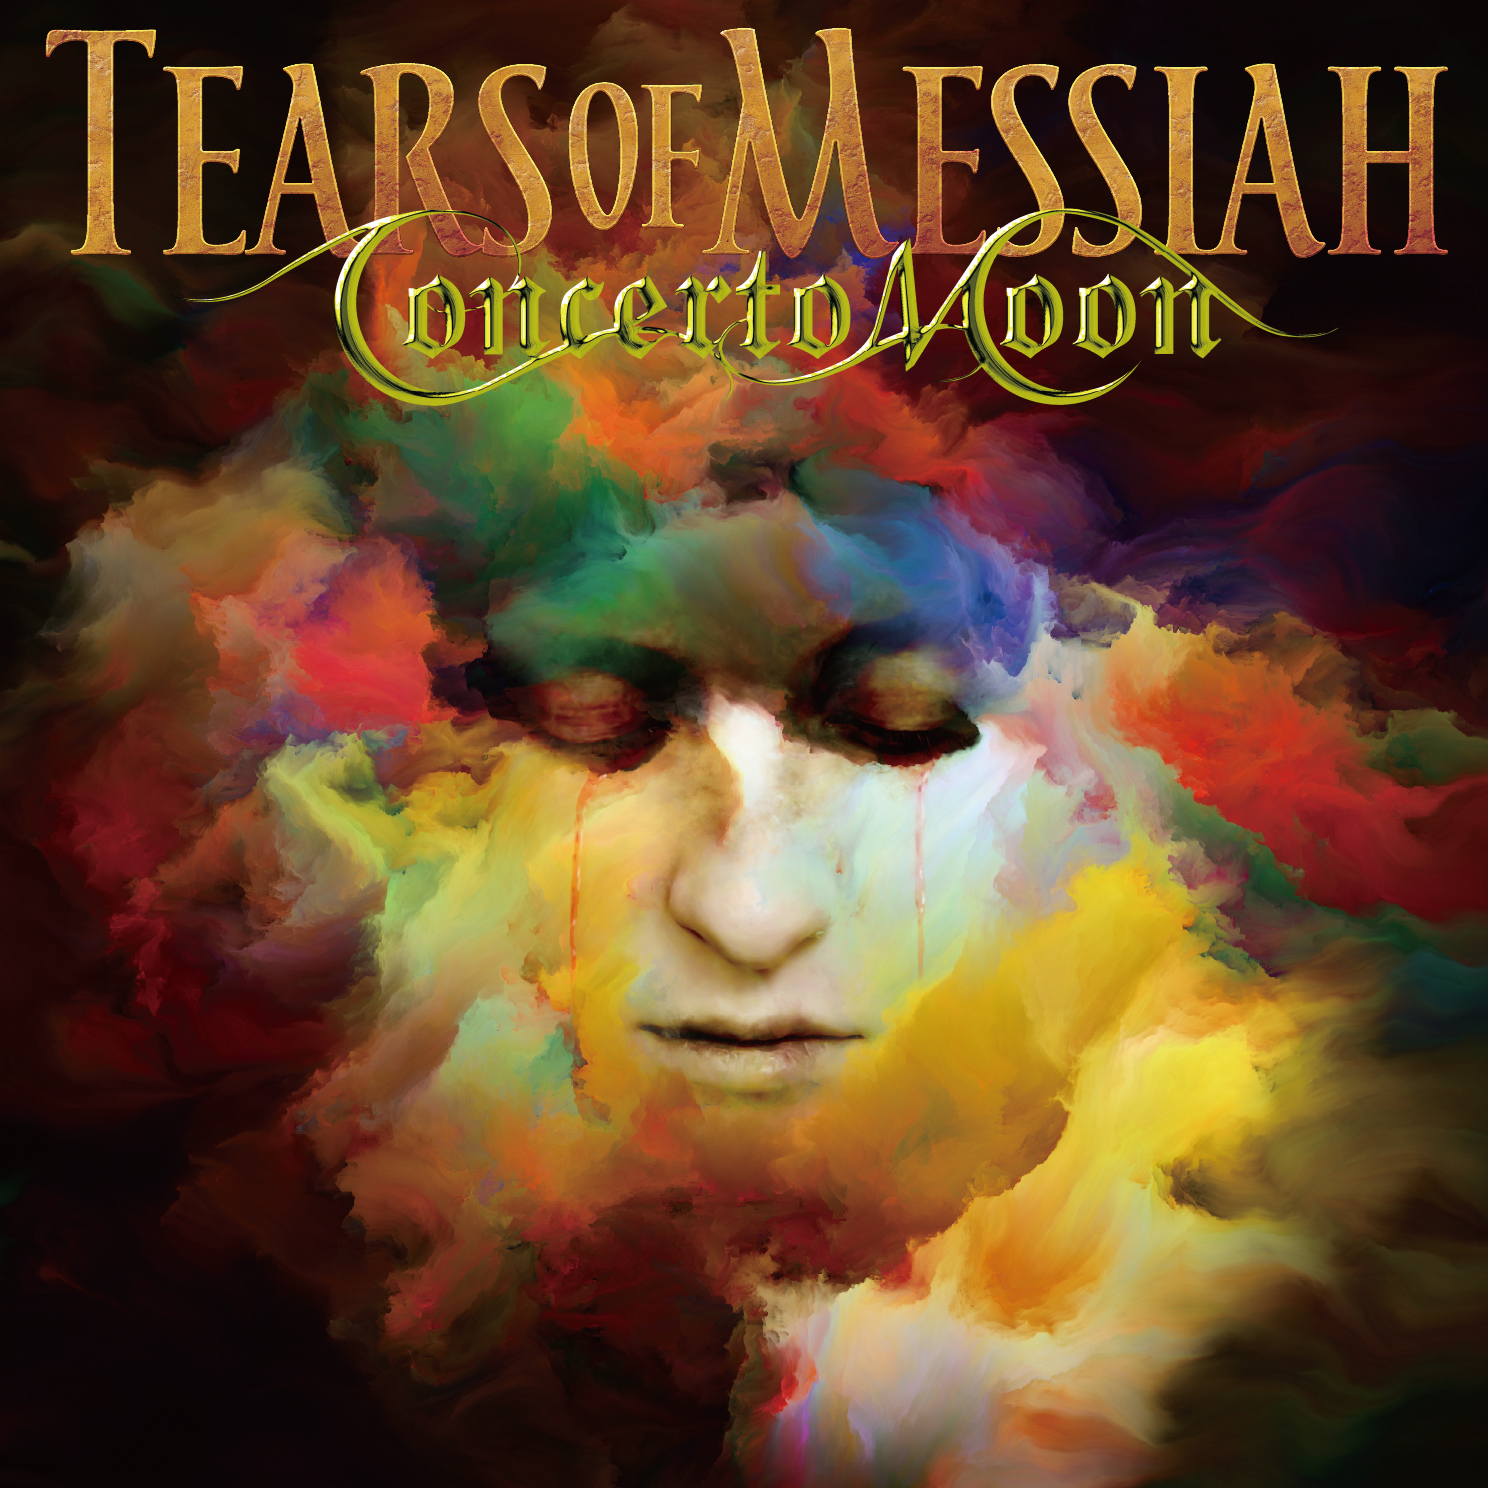 CONCERTO MOON / TEARS OF MESSIAH -Deluxe Edition- (WLKR-028 